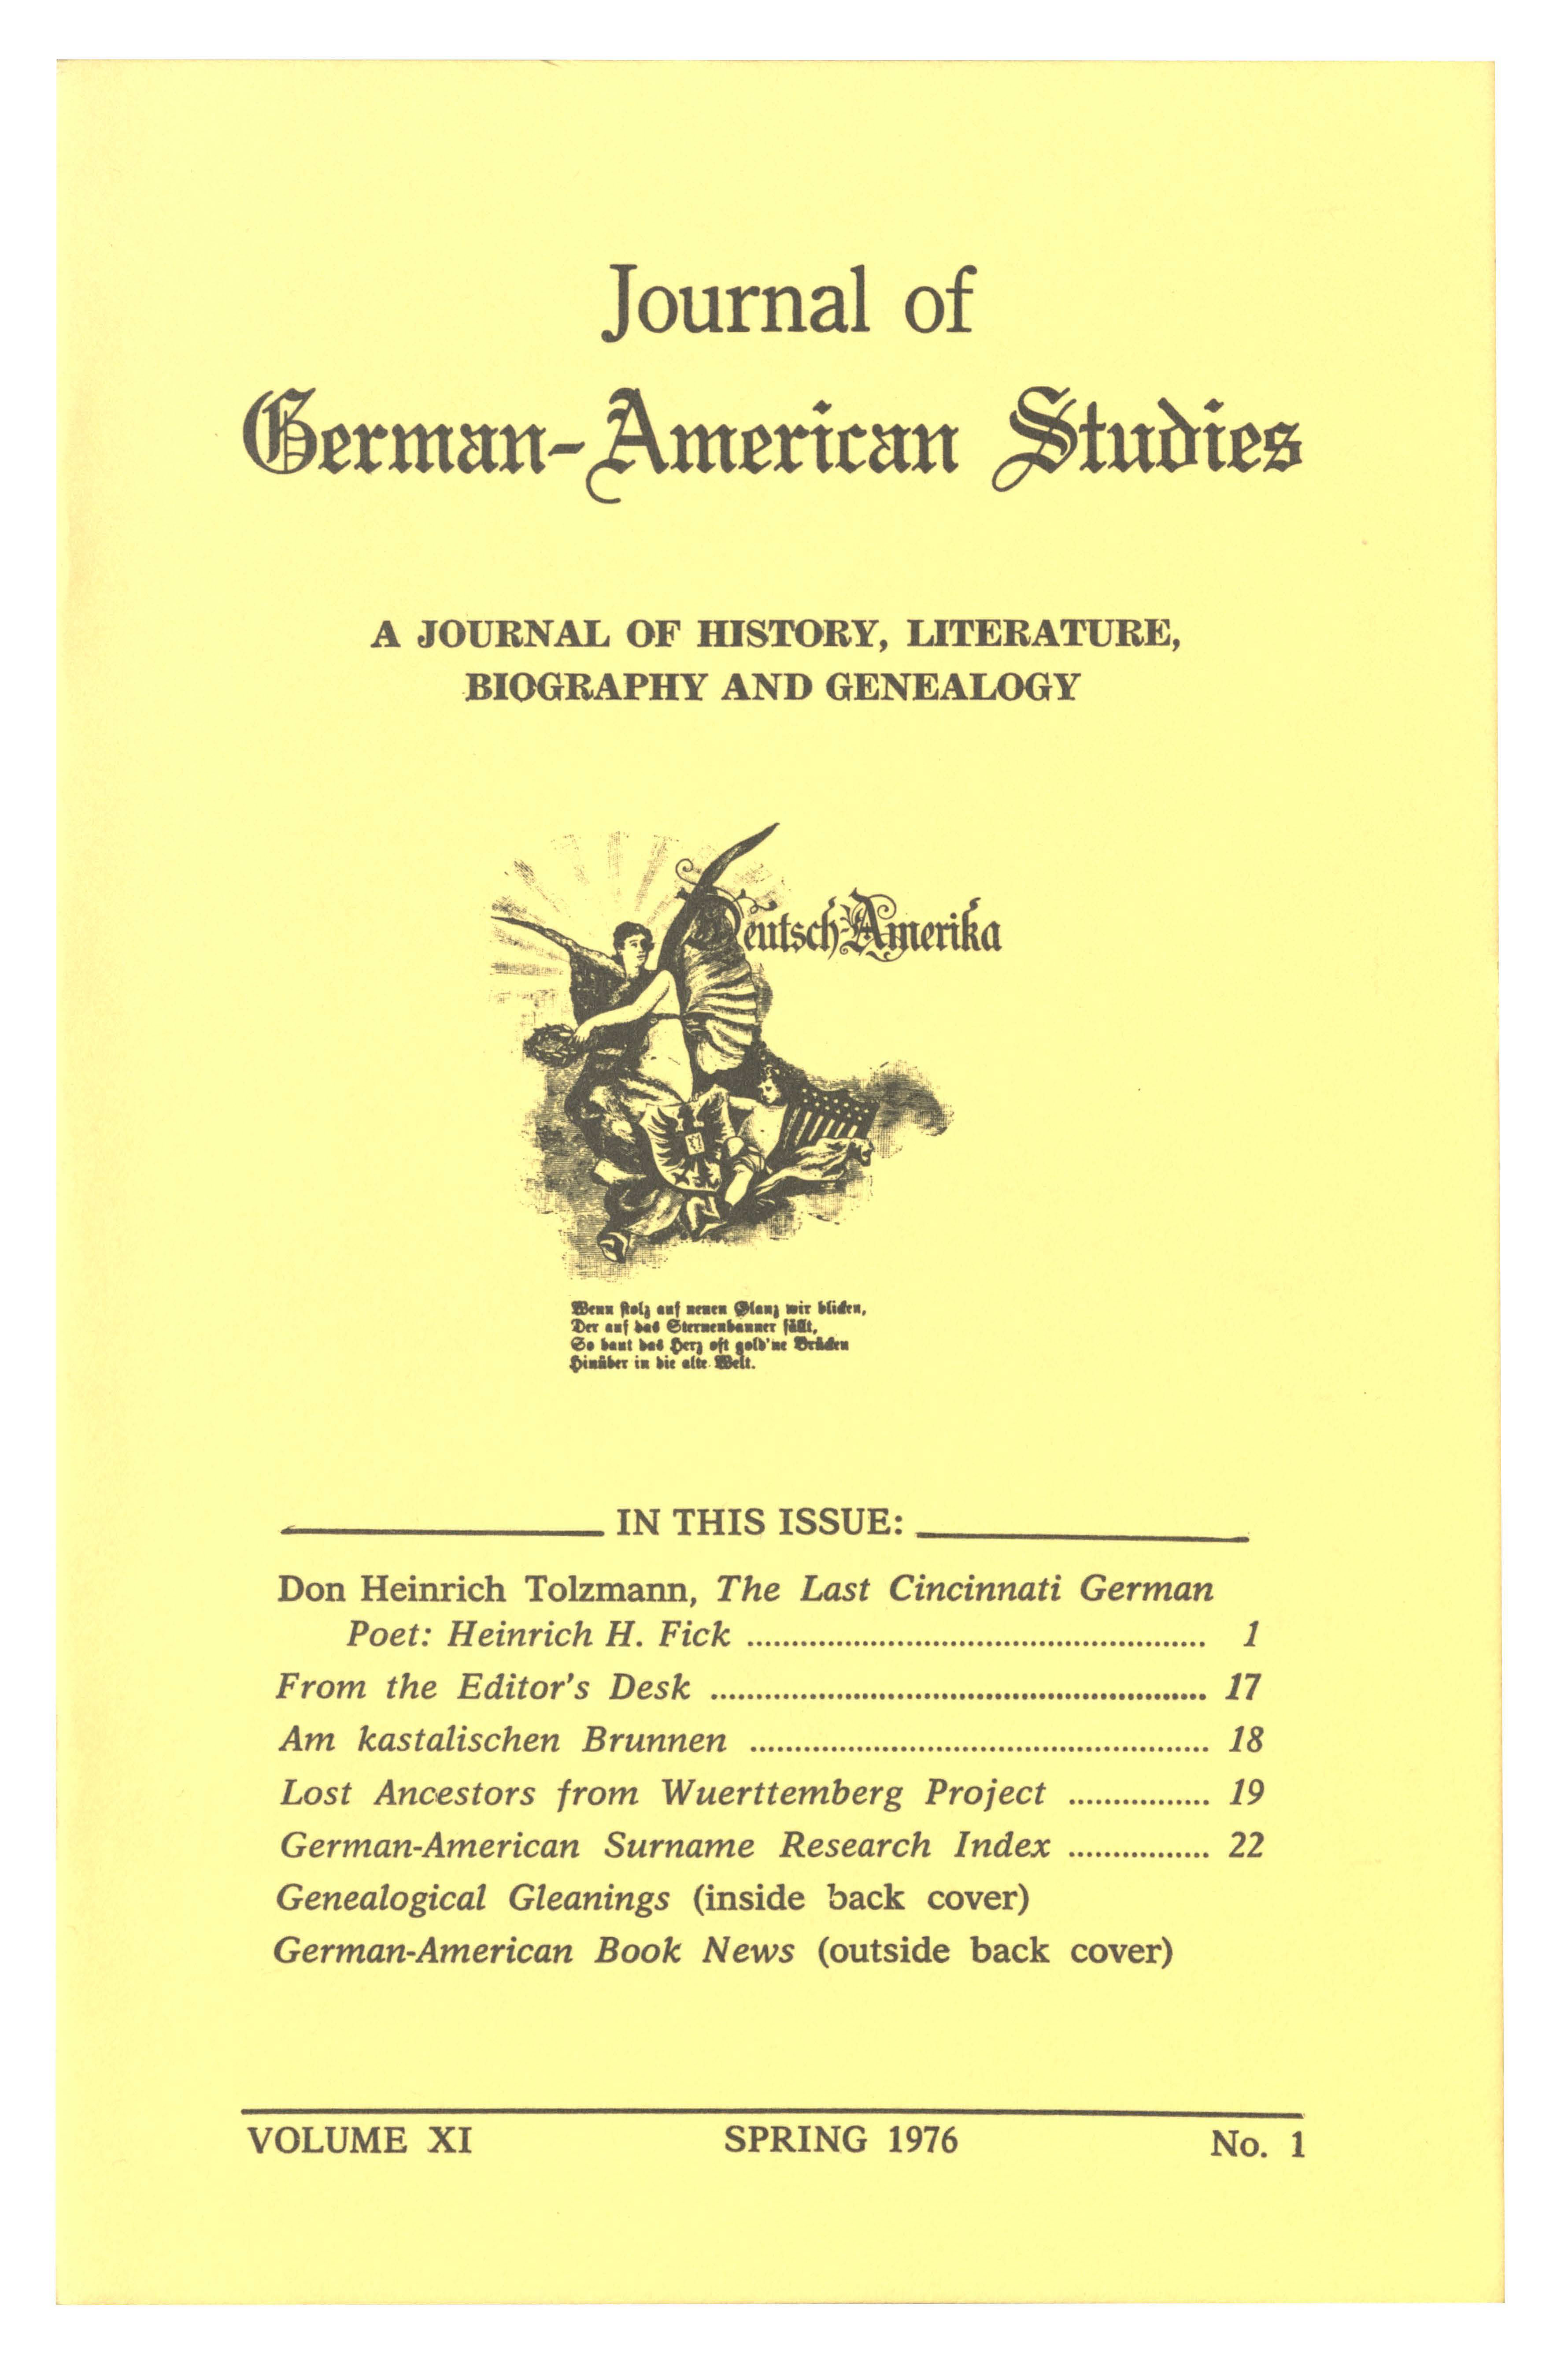 Cover of JGAS with table of contents and yellow background